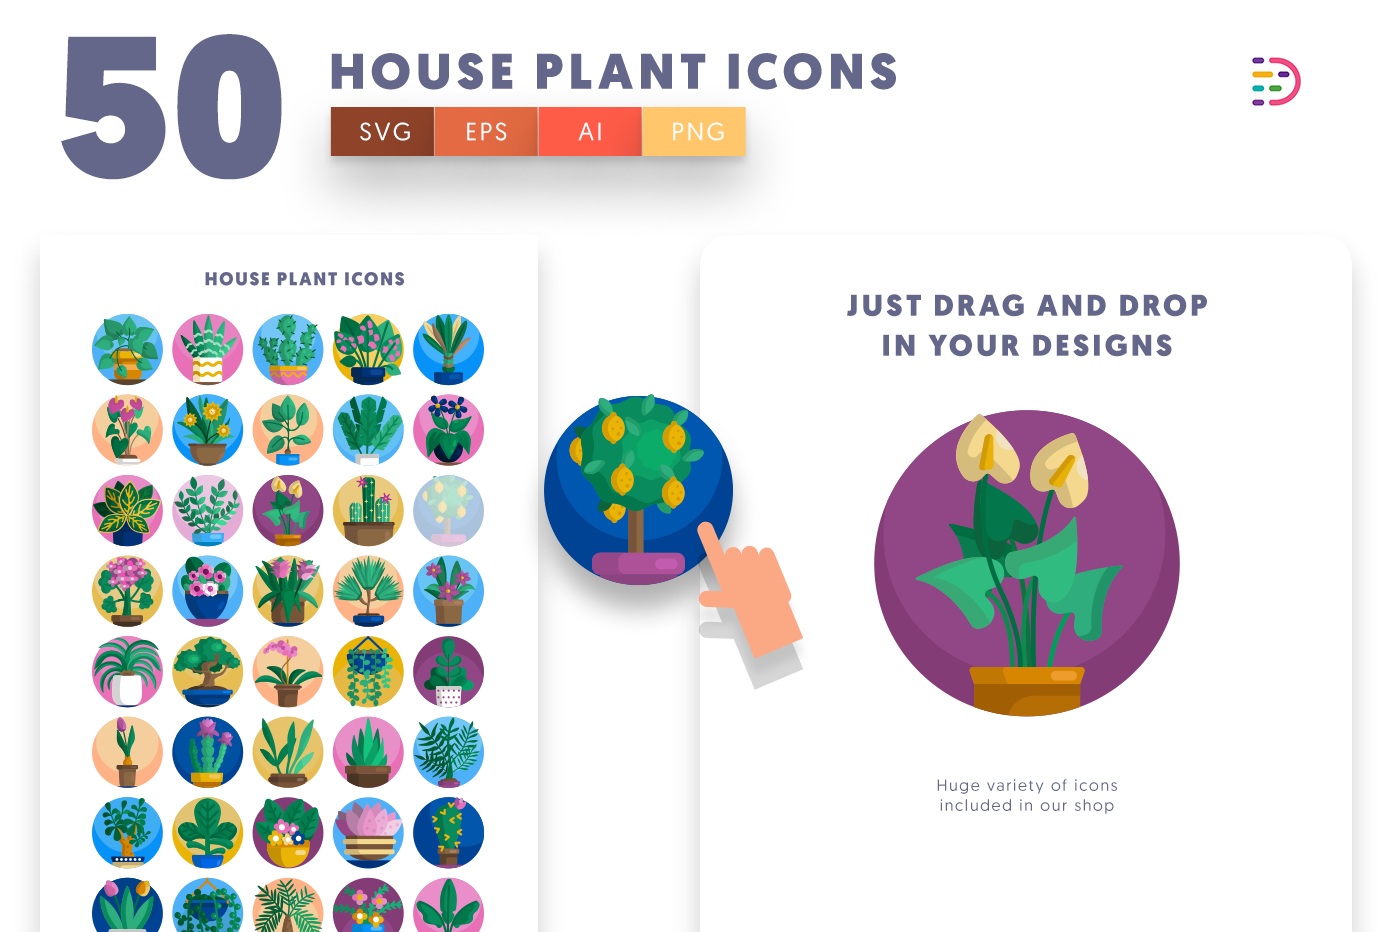  House Plant Icons with colored backgrounds